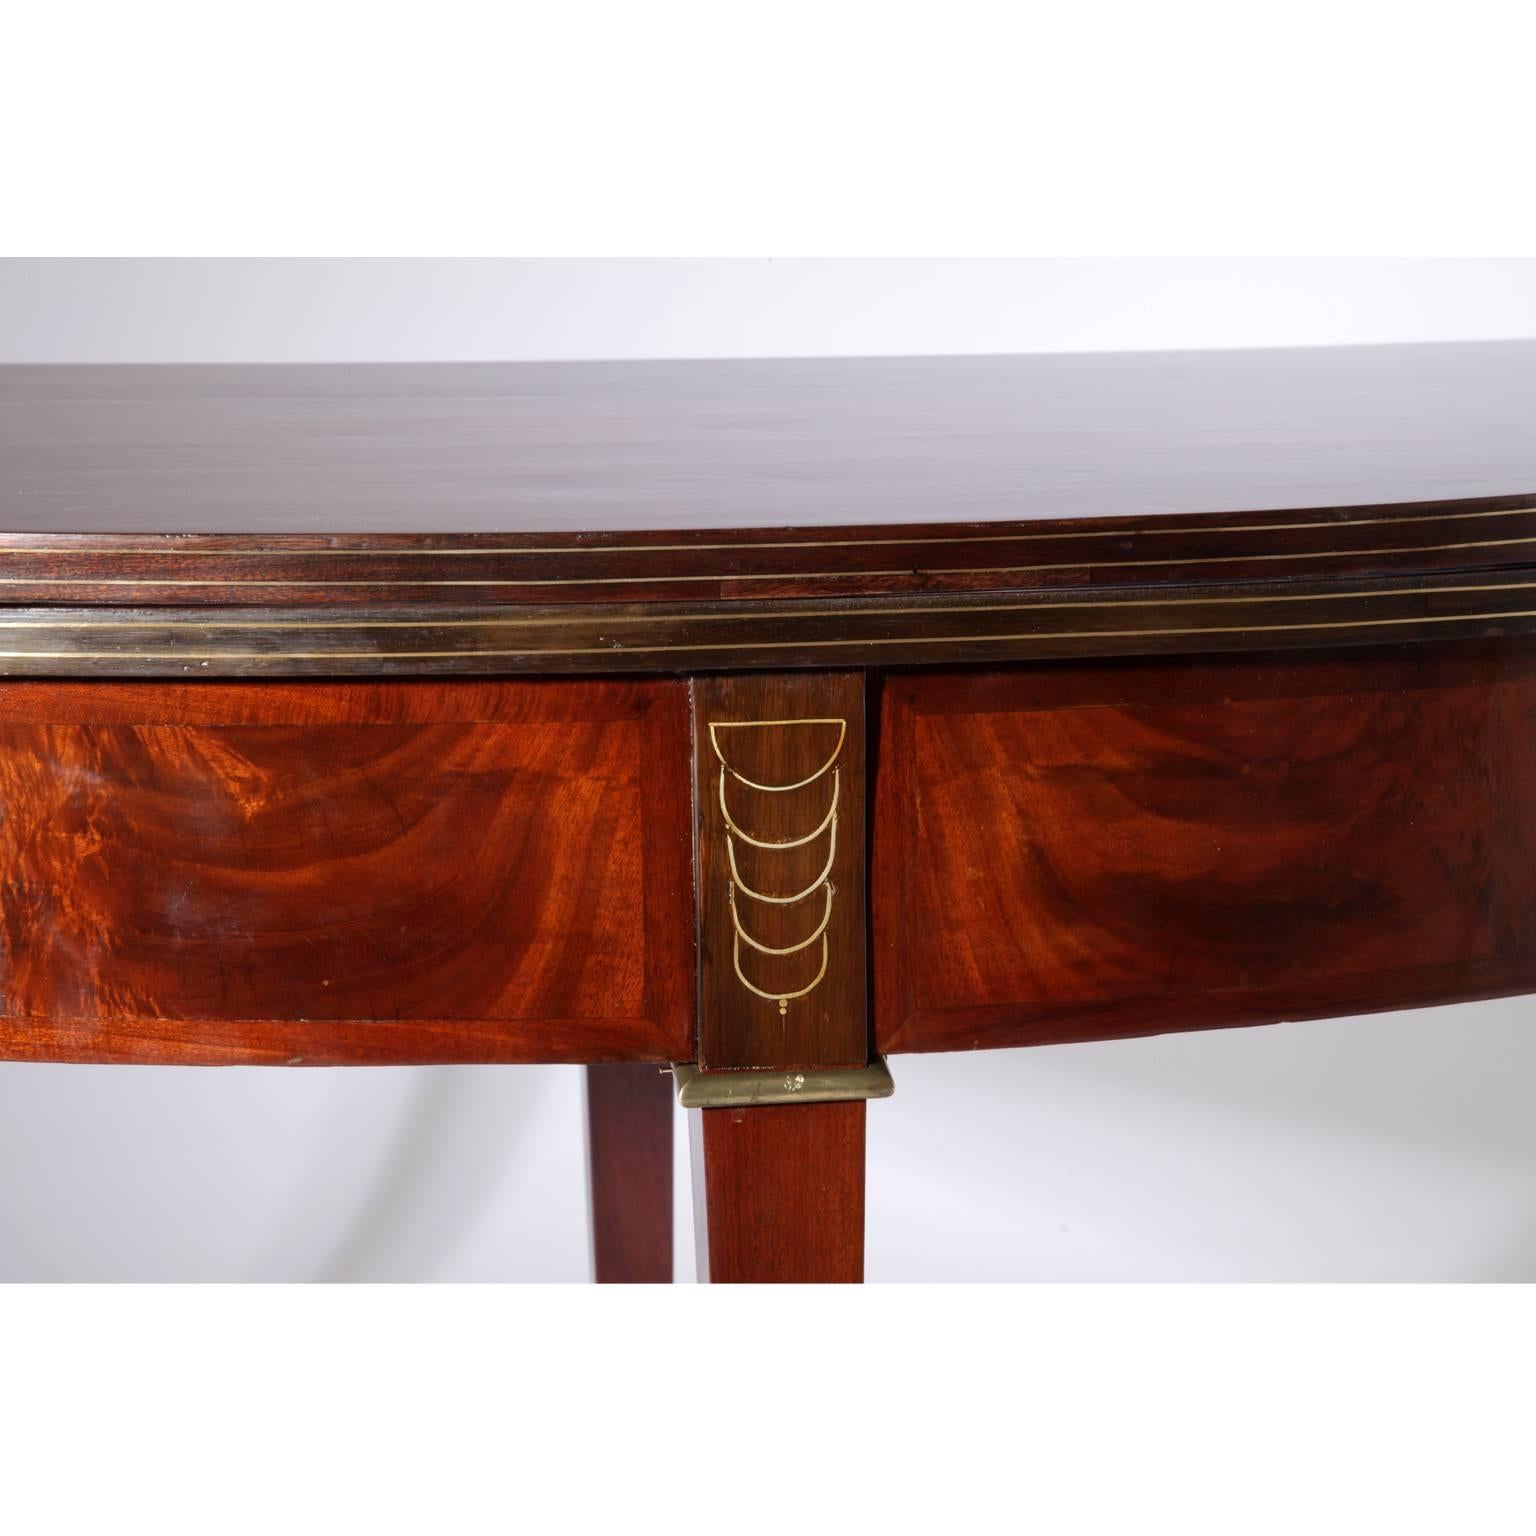 Louis Seize Demilune Table by J.-J. Chapuis, Belgium, Late 18th Century In Excellent Condition For Sale In Greding, DE